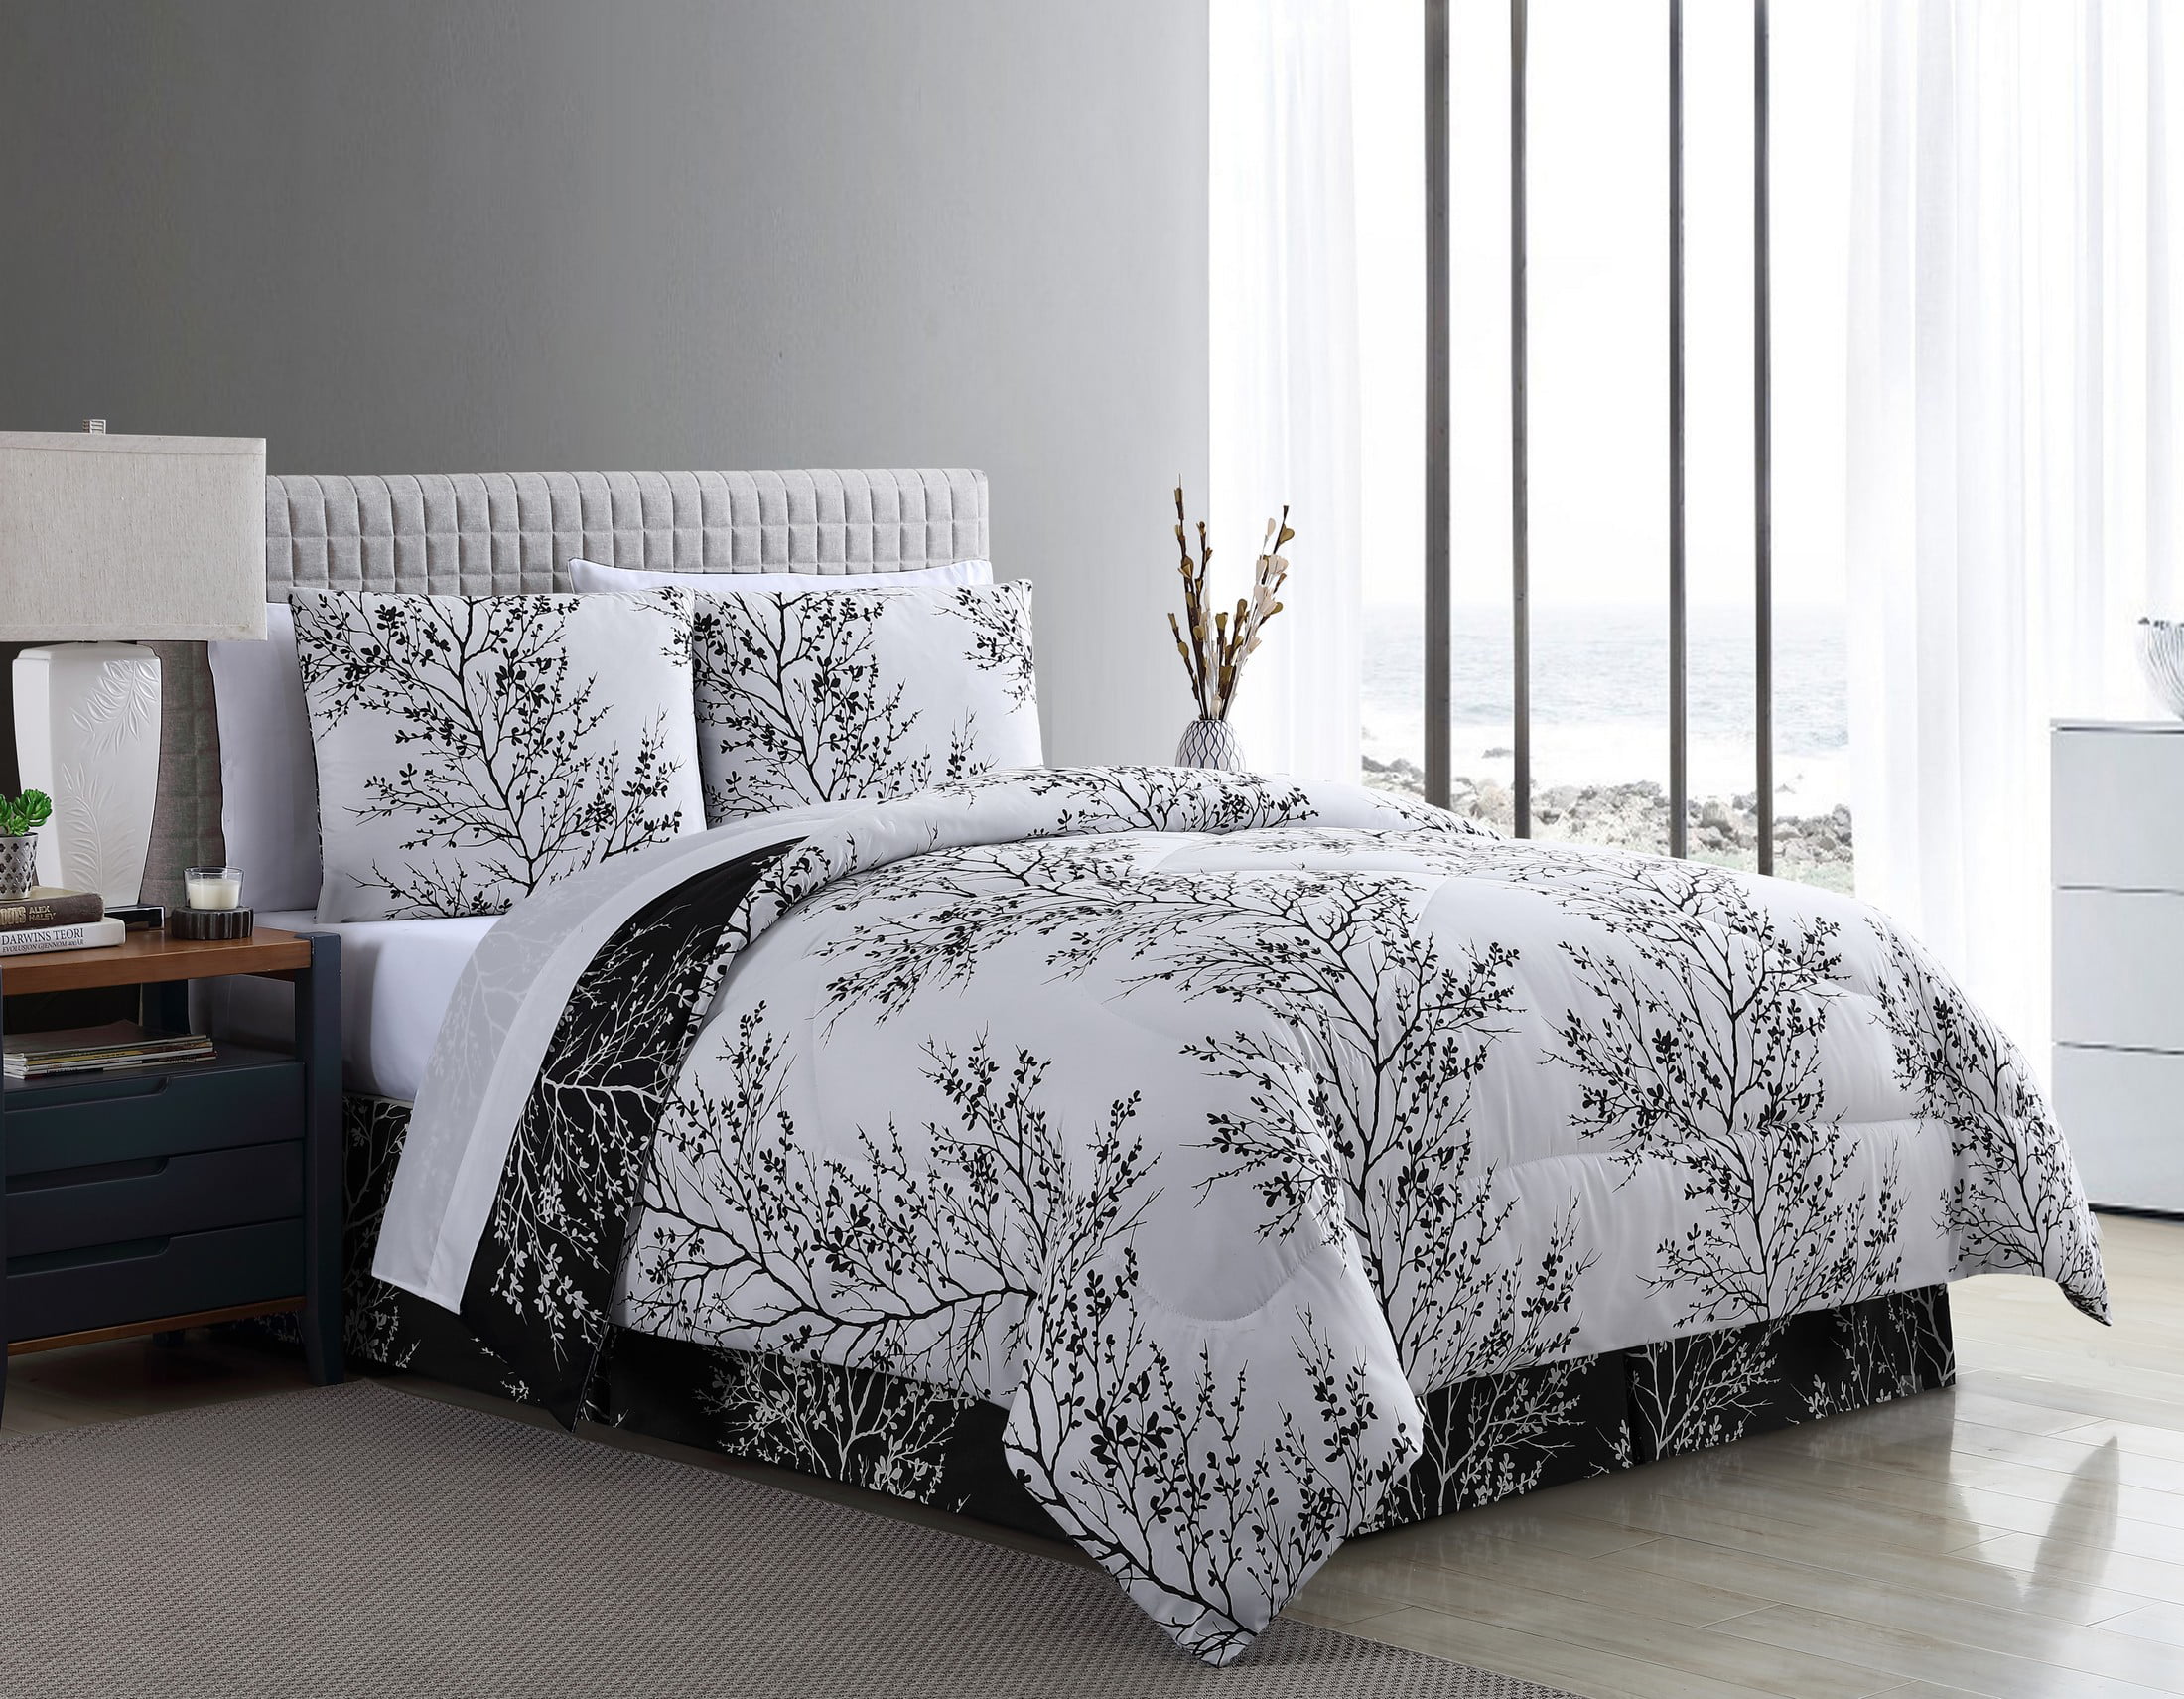 VCNY Home Black/White Leaf Polyester 8-Piece Bed in a Bag, Queen ...